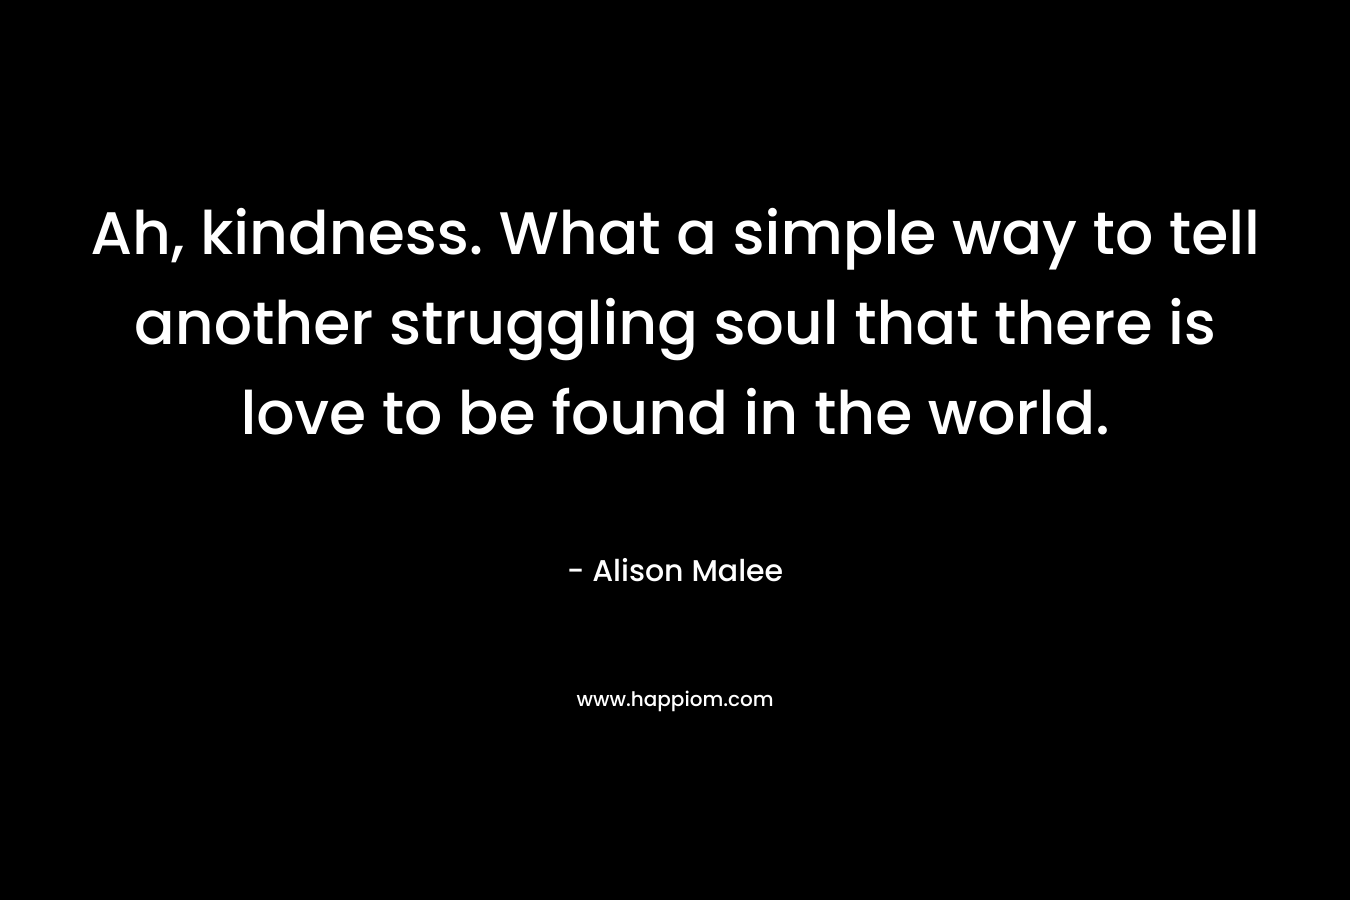 Ah, kindness. What a simple way to tell another struggling soul that there is love to be found in the world. – Alison Malee